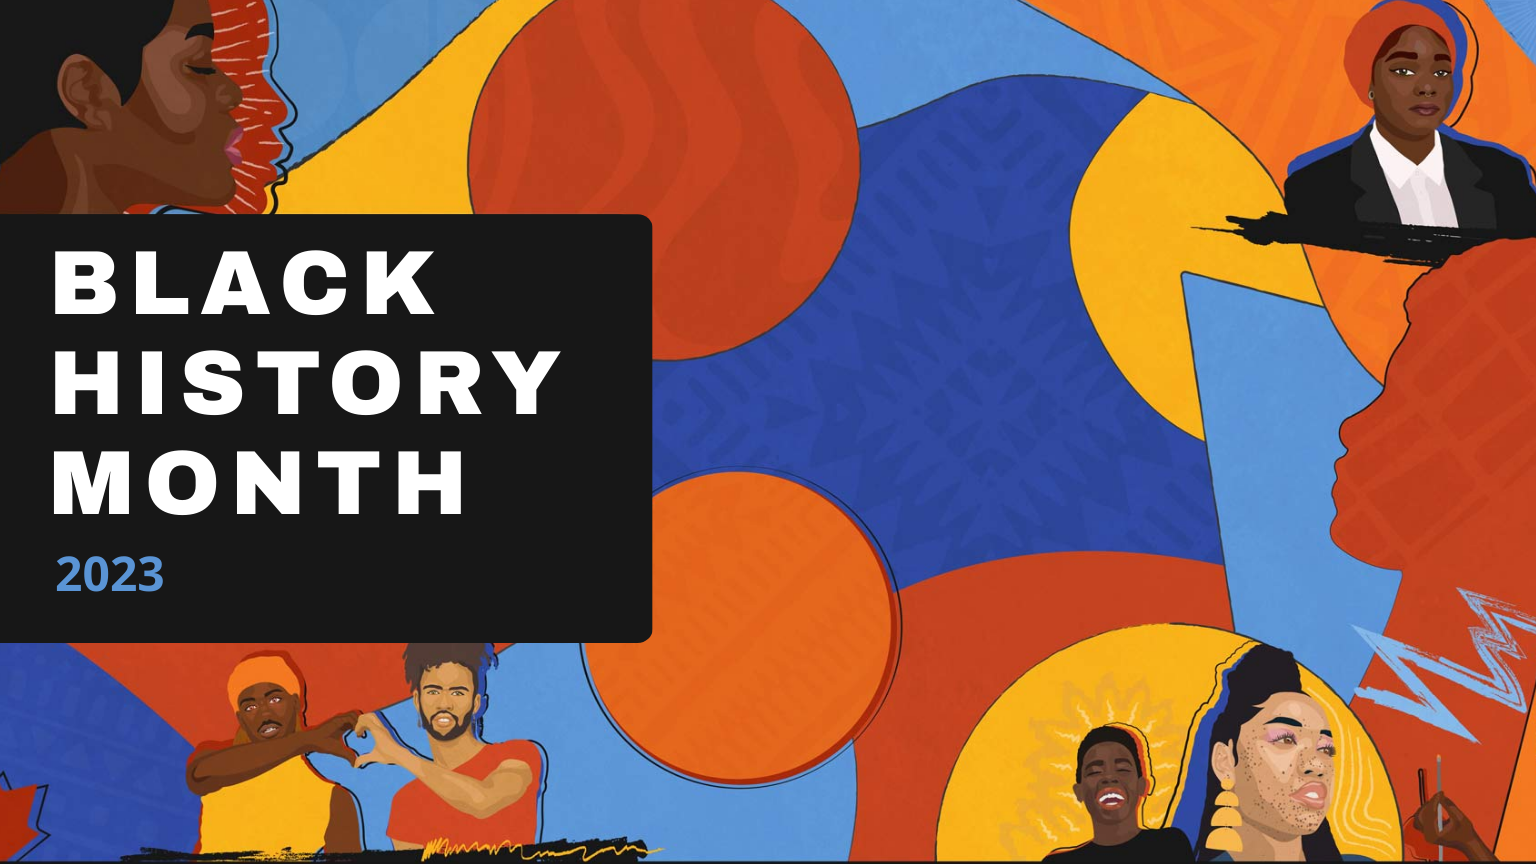 A blue, orange, yellow and red abstract design with illustrations depicting a diverse array of Black people. A black text box on the left side of the image contains text reading, “Black History Month 2023.”